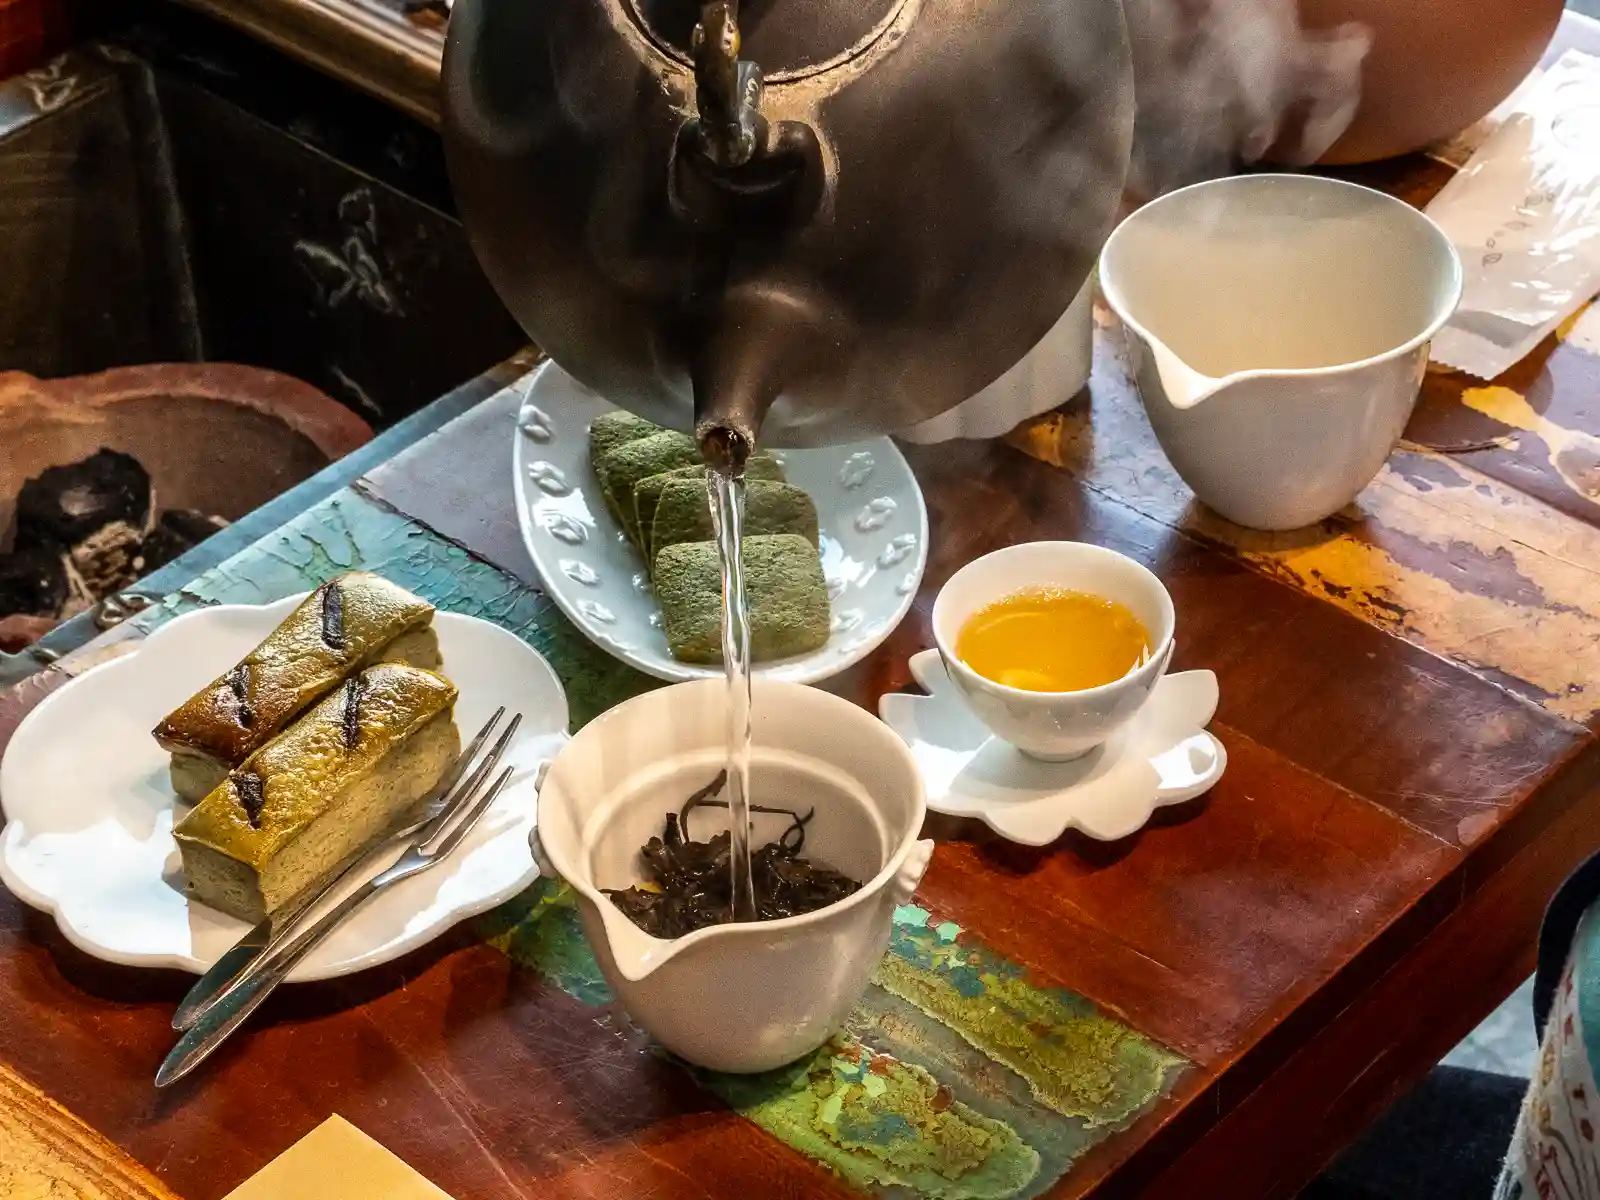 A tea set and plates filled with cookies and cakes at Jiufen Tea House.